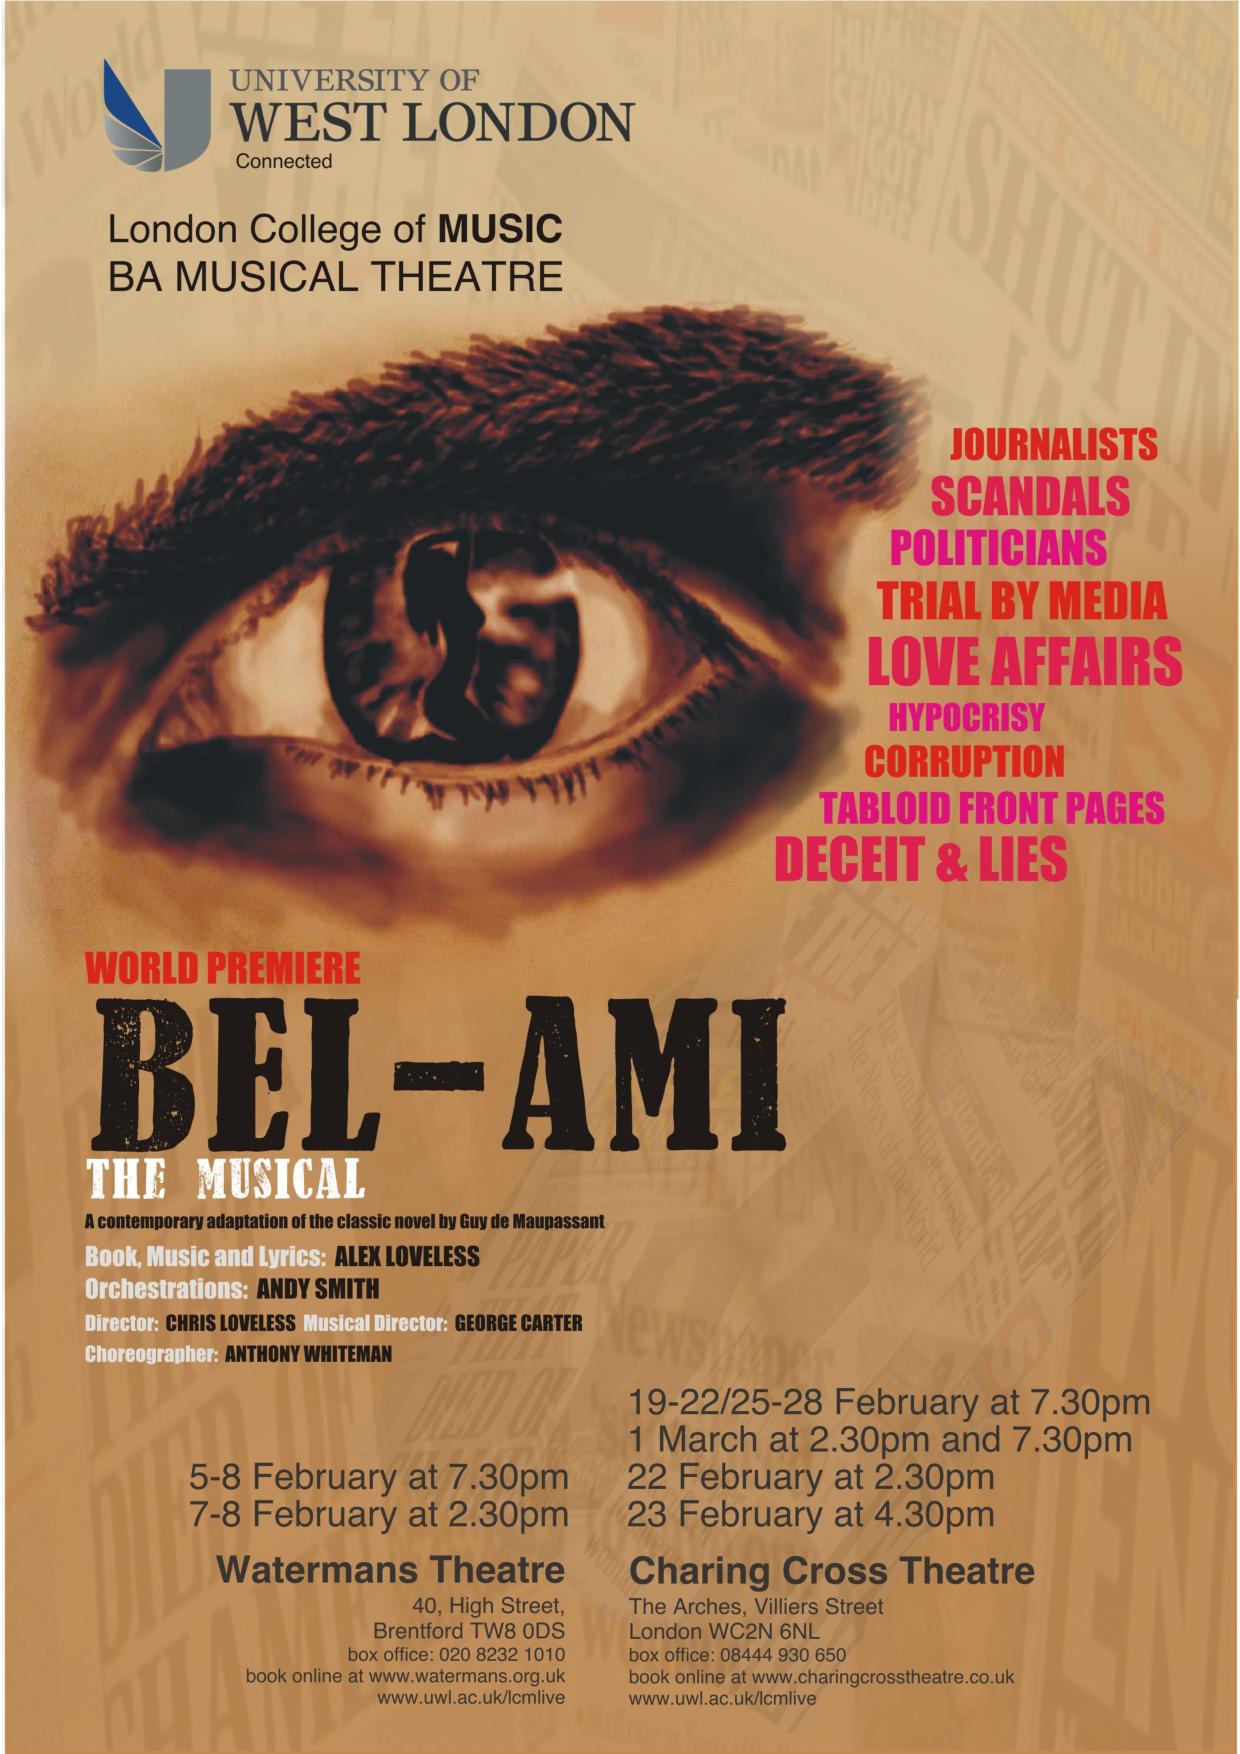 Bel Ami Musical - journalists, scandals, politicians, trial by media, love affairs, hypocrisy, corruption, deceit and lies